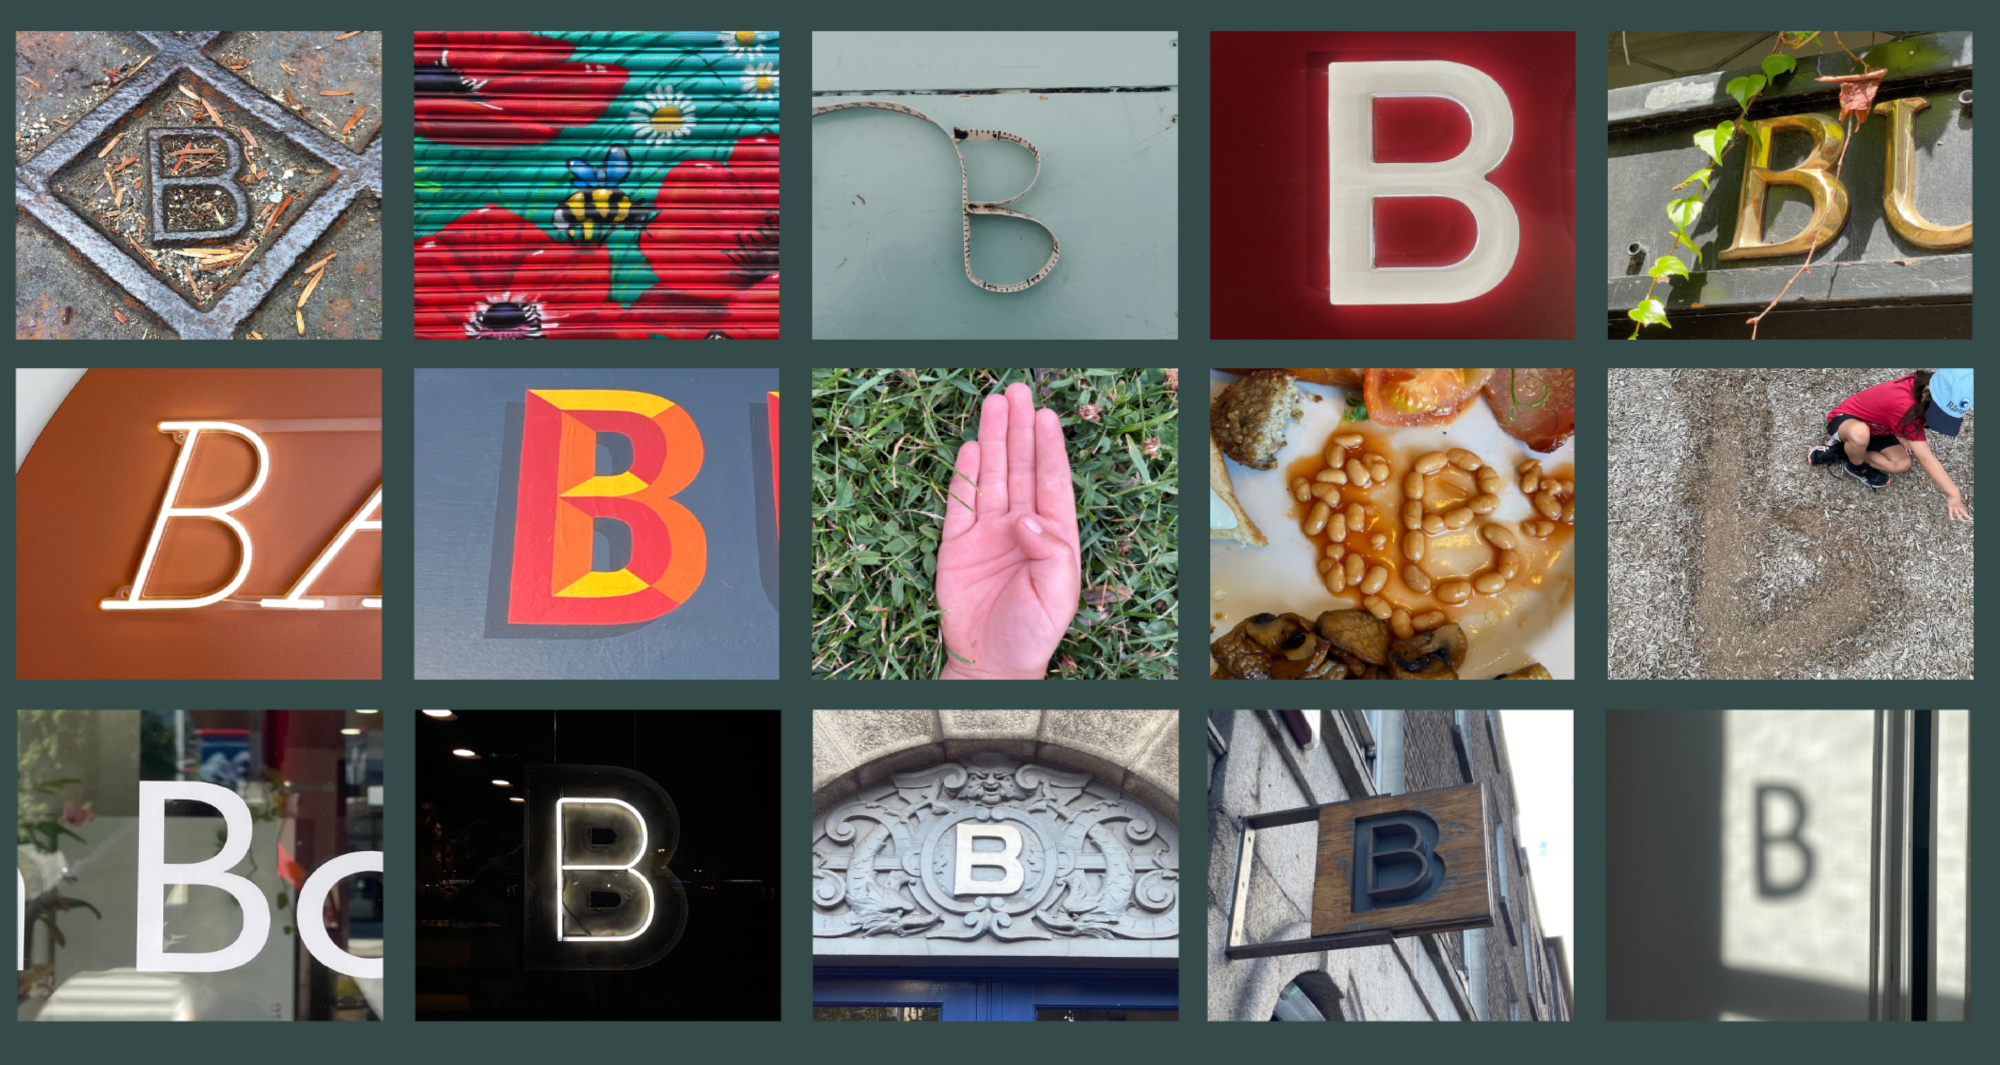 A collage of the letter "B" found in different context and scenarios.